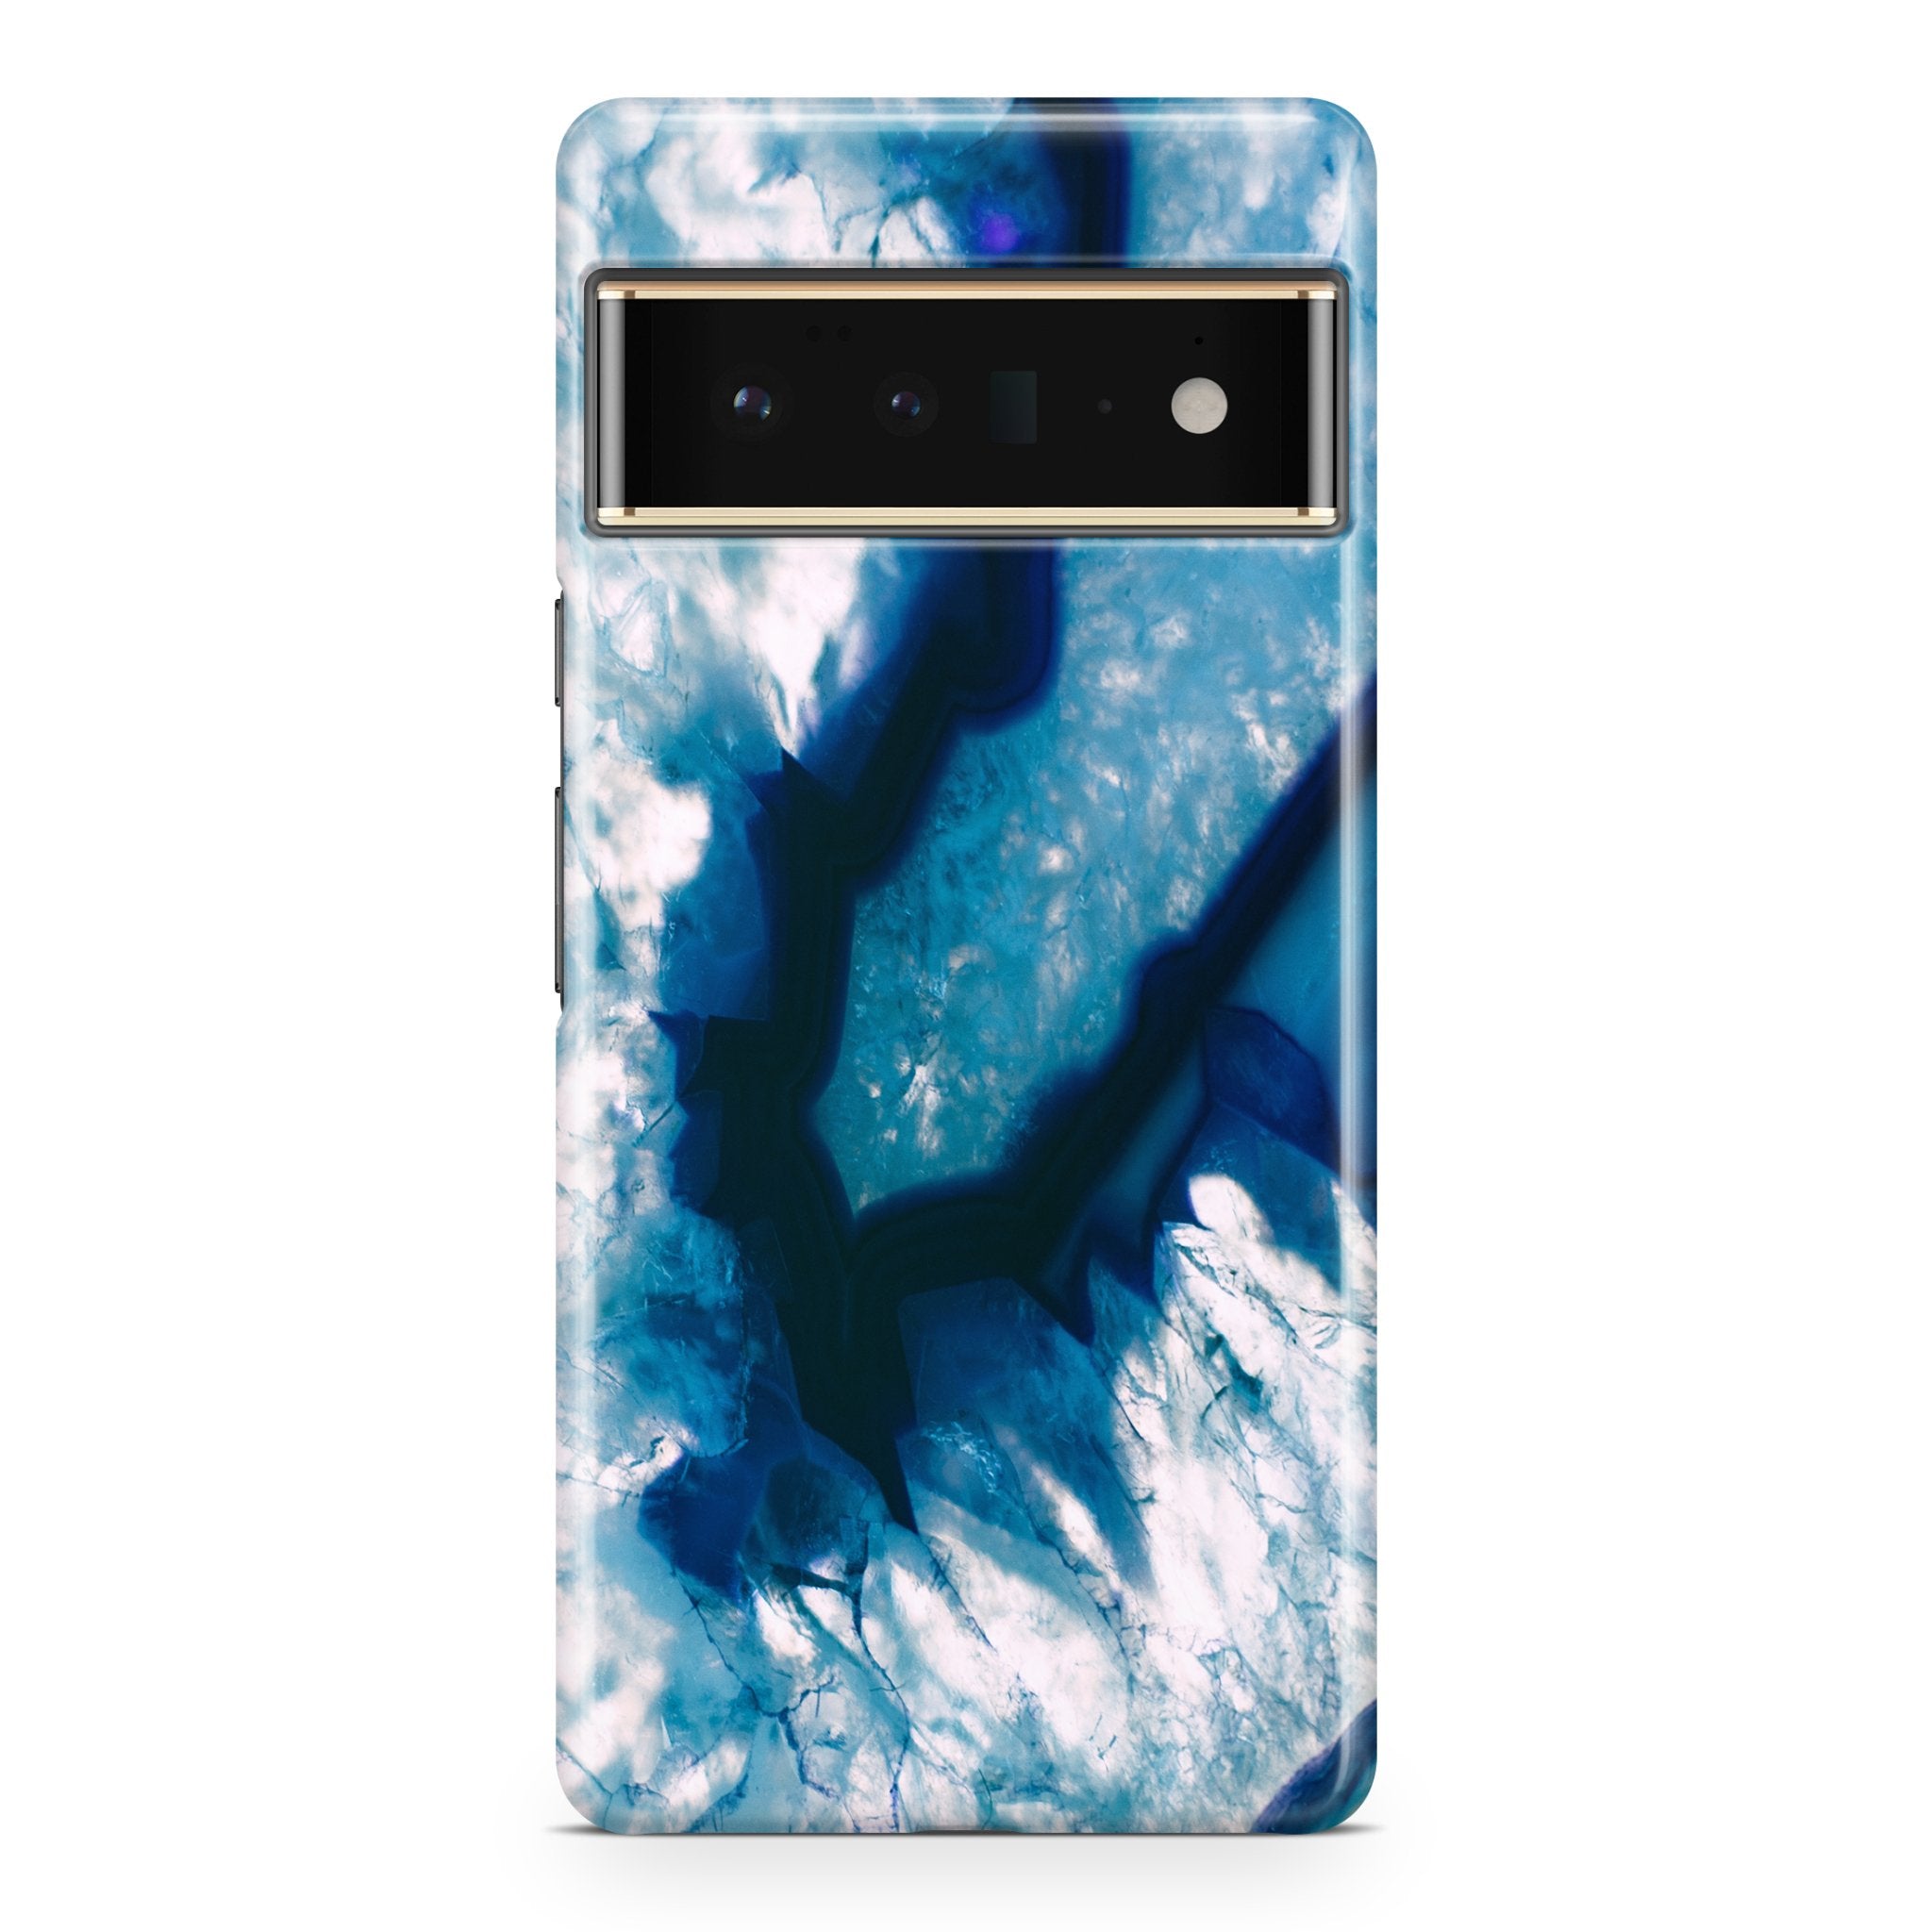 Blue Geode III - Google phone case designs by CaseSwagger